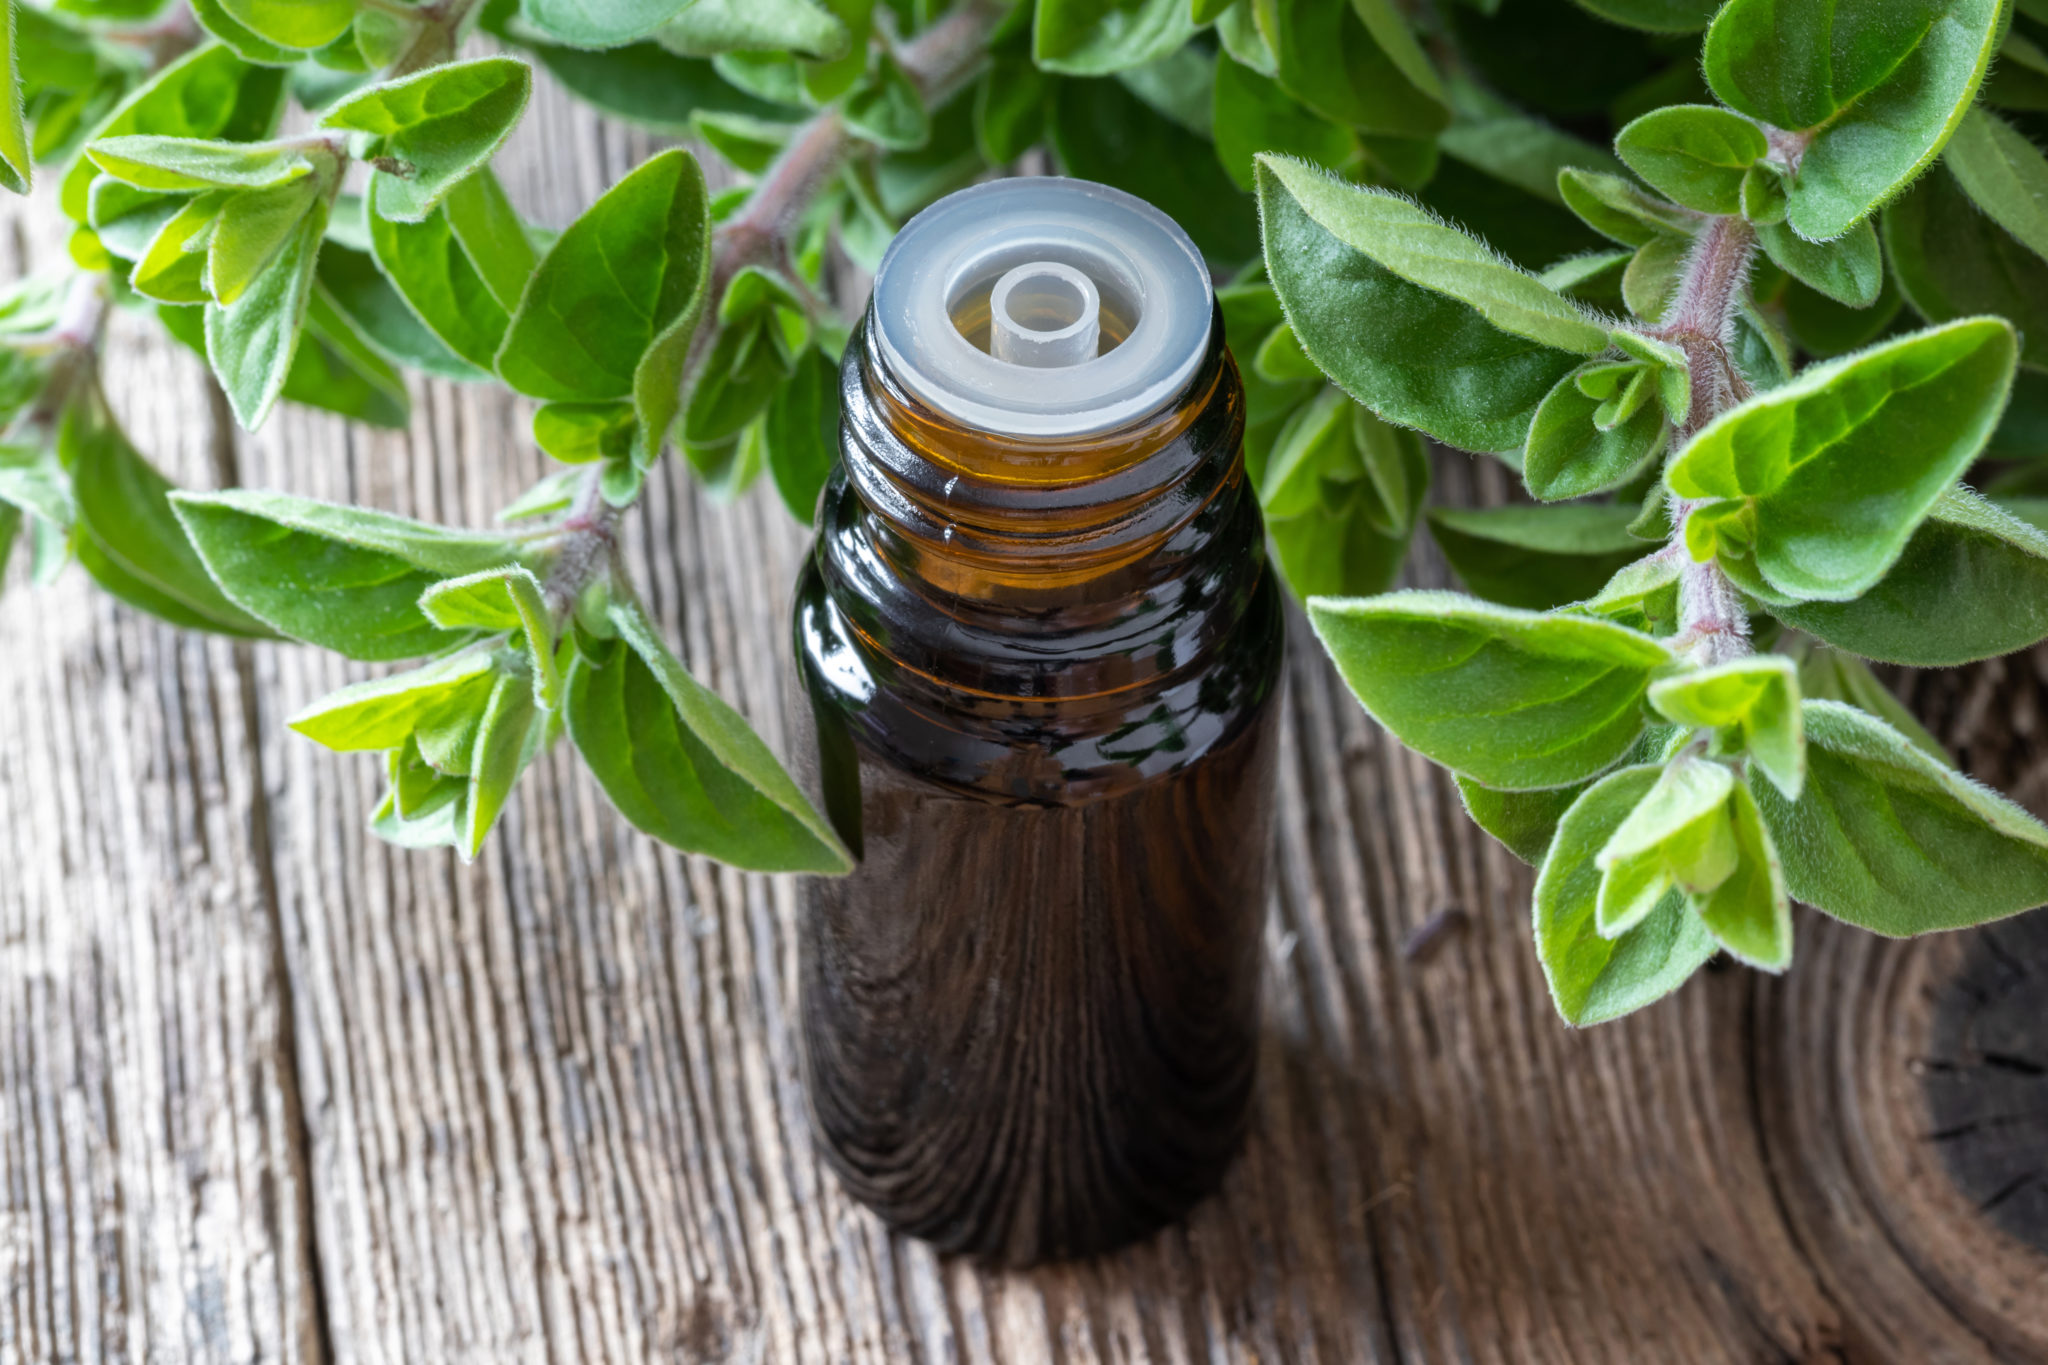 6 Benefits of Oregano Essential Oil Nature's Antibiotic Helps with Yeast Infections, Parasites